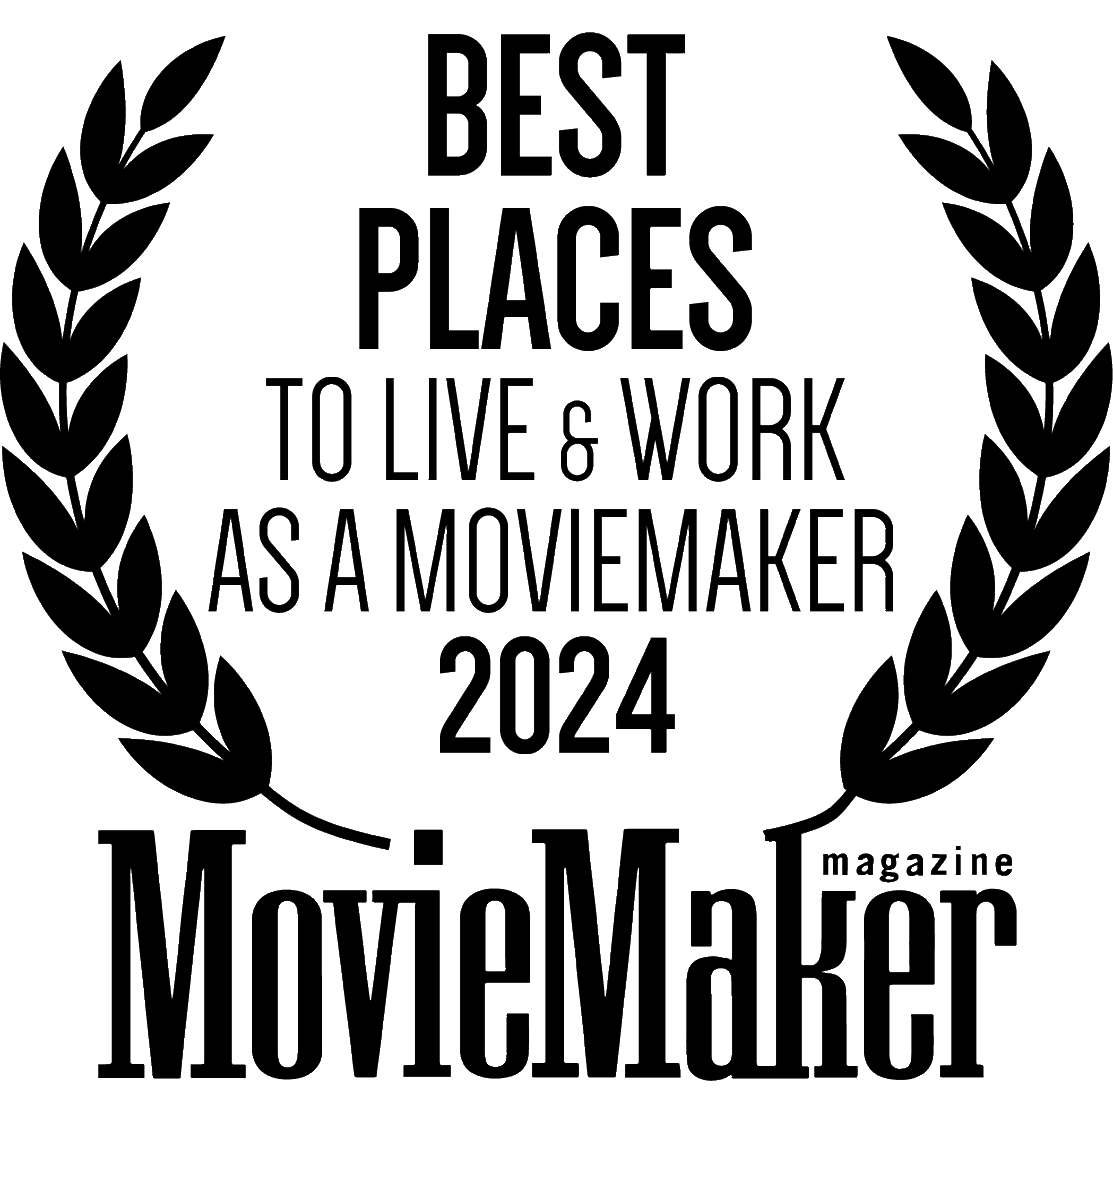 The secret is out! Toronto was just named the # 1 Best Place to Live and Work as a Movie Maker. 🎥 This year, the survey of film cities conducted by Movie Maker Magazine recognizes Toronto's excellent crews, beautiful locations and vast studio space. moviemaker.com/best-places-mo…